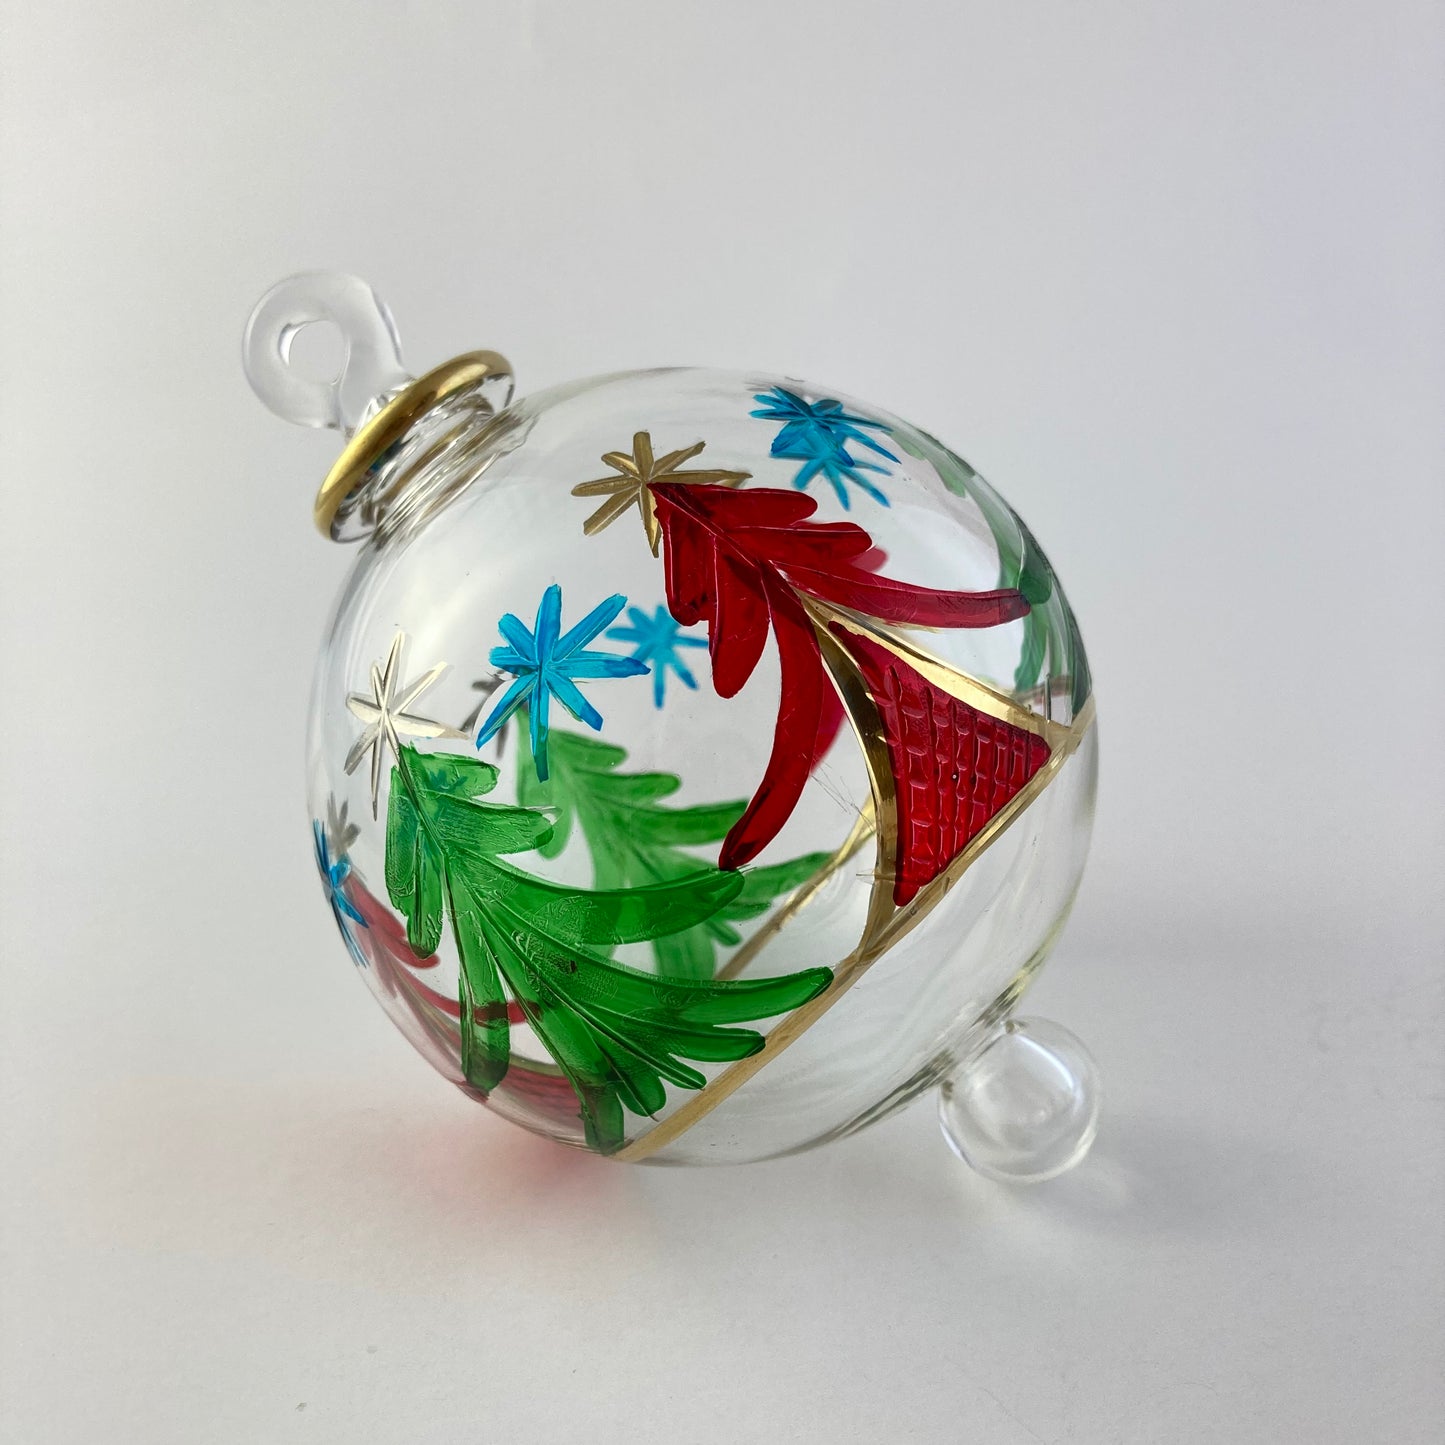 Blown Glass Ornament - Christmas Trees Red and Green